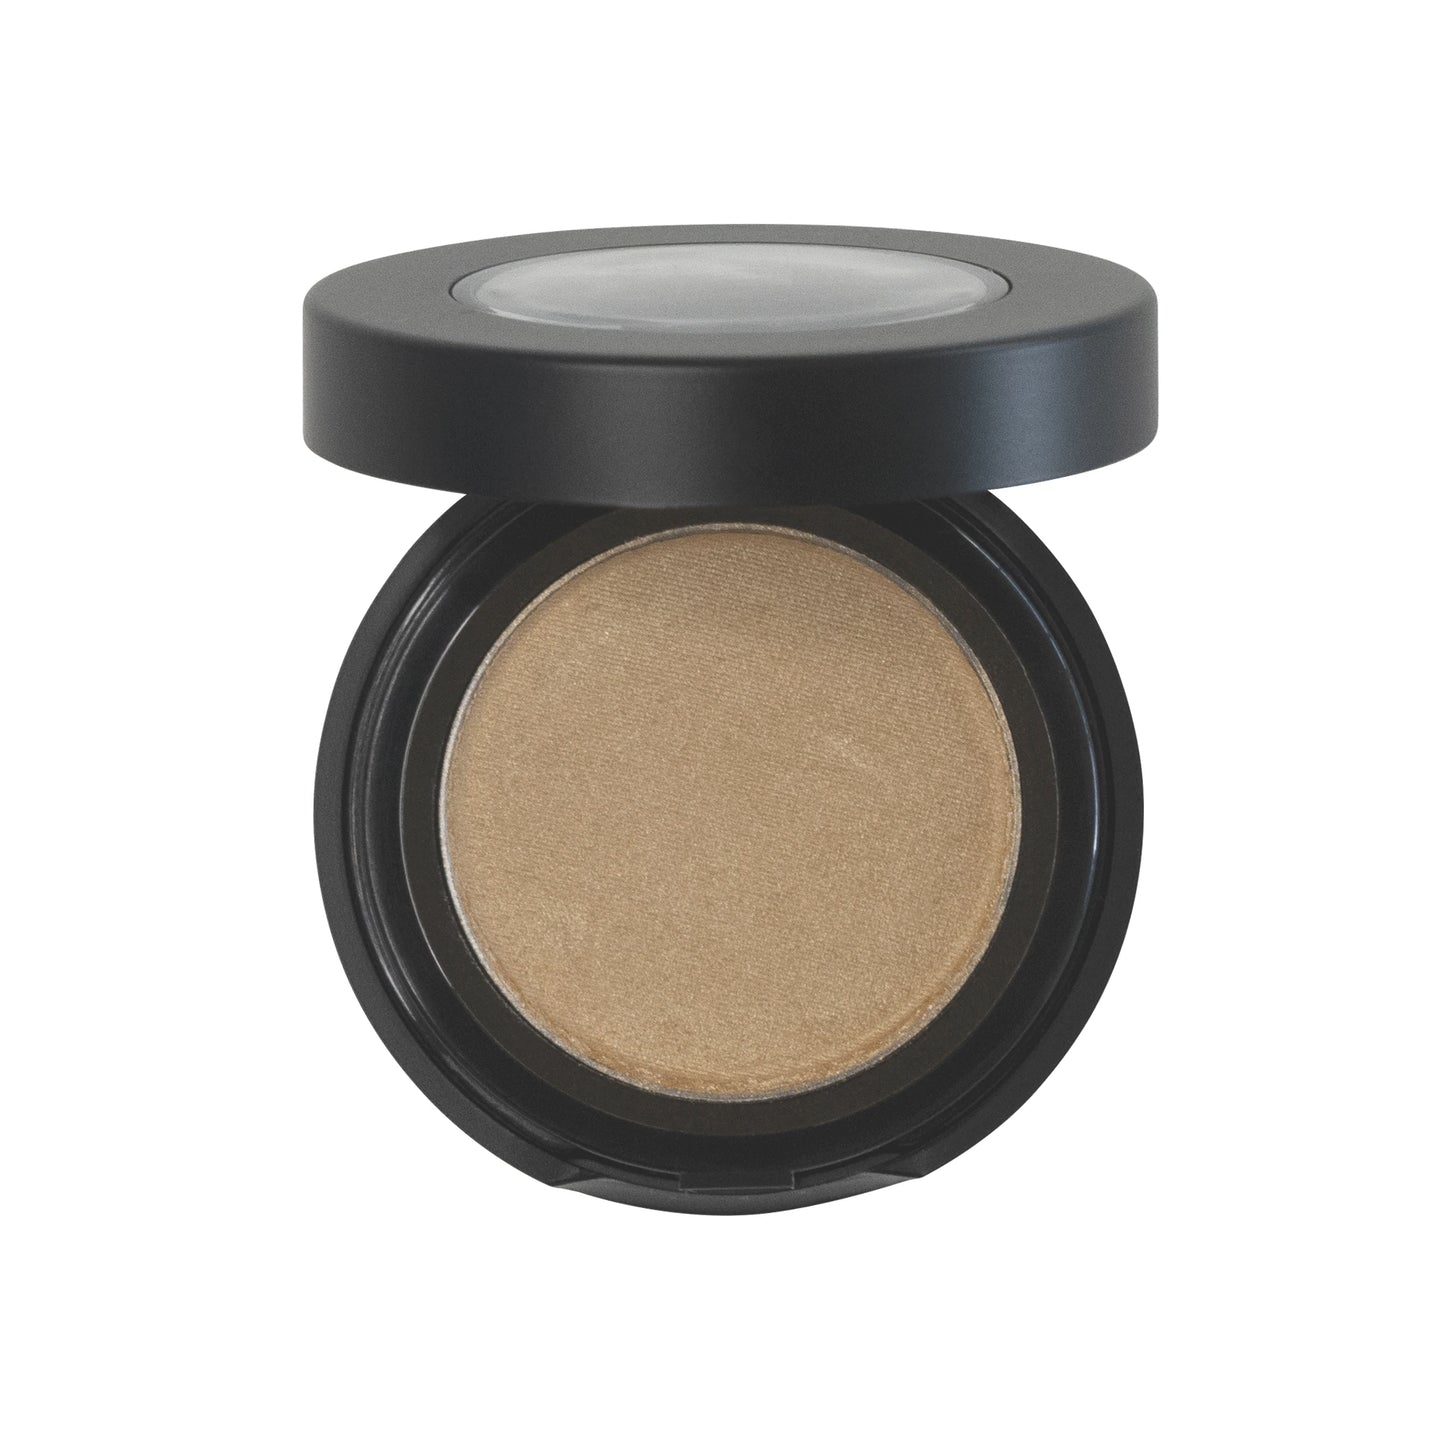 You’re about to discover your favorite eyeshadow. Enhance your look with our talc-free single pan eyeshadow shades you can mix and match to create your favorite looks. Triple-milled for the finest powder quality, you’ll be able to easily build the shade intensity you’re looking for. Pair with your Cruisin Organics eye primer and you’ll have all-day, long-lasting, and beautiful eye looks.